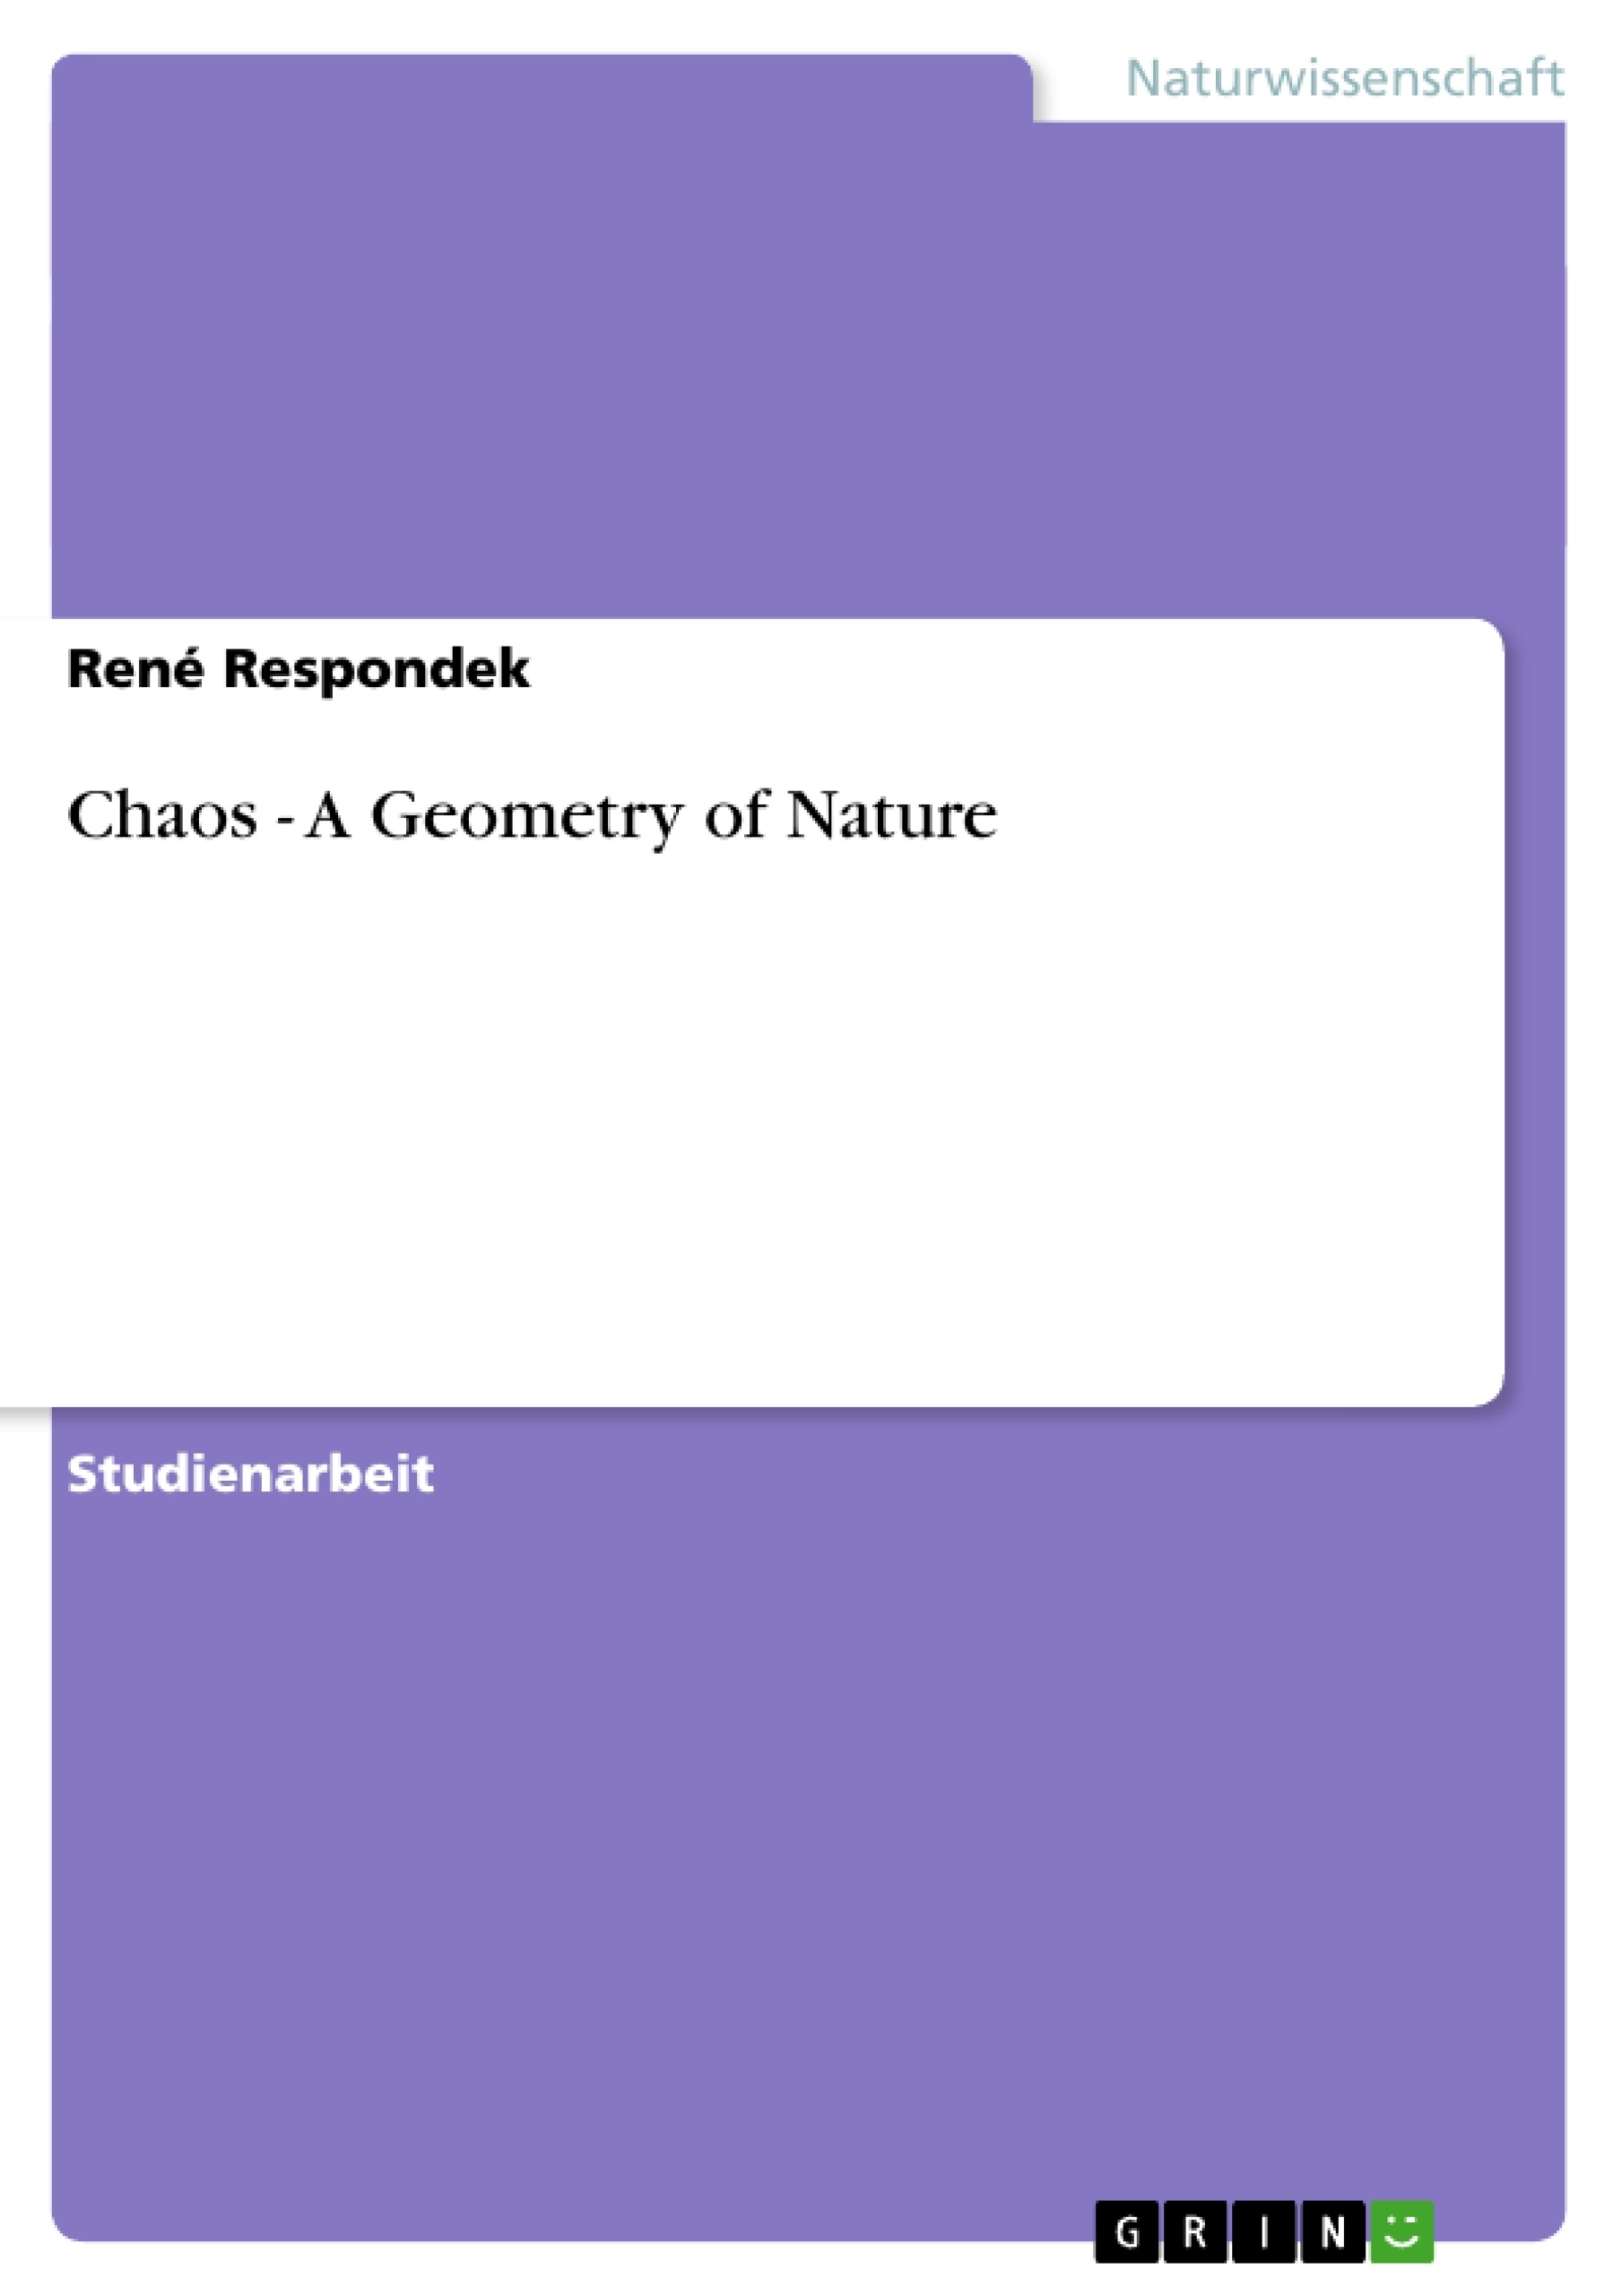 Titre: Chaos - A Geometry of Nature